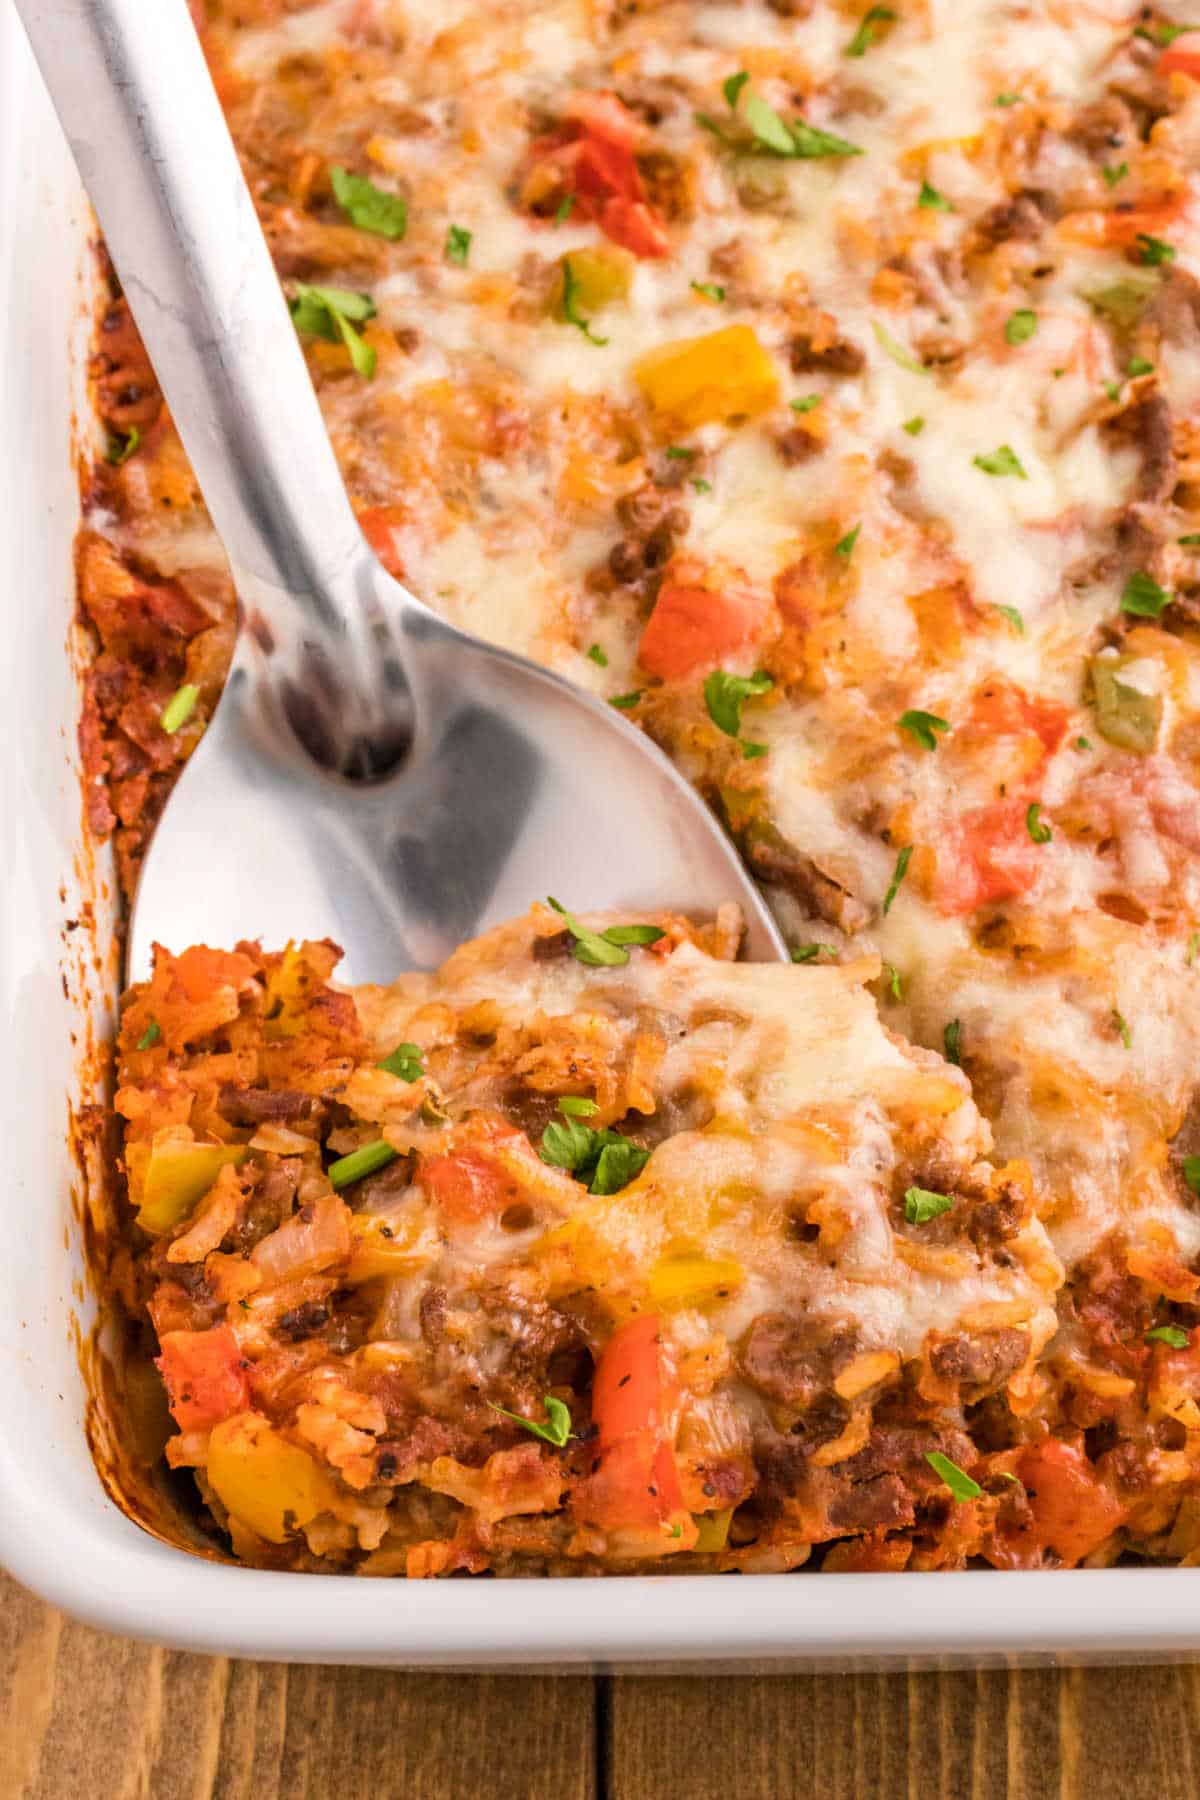 Stuffed pepper casserole with a silver serving spoon.